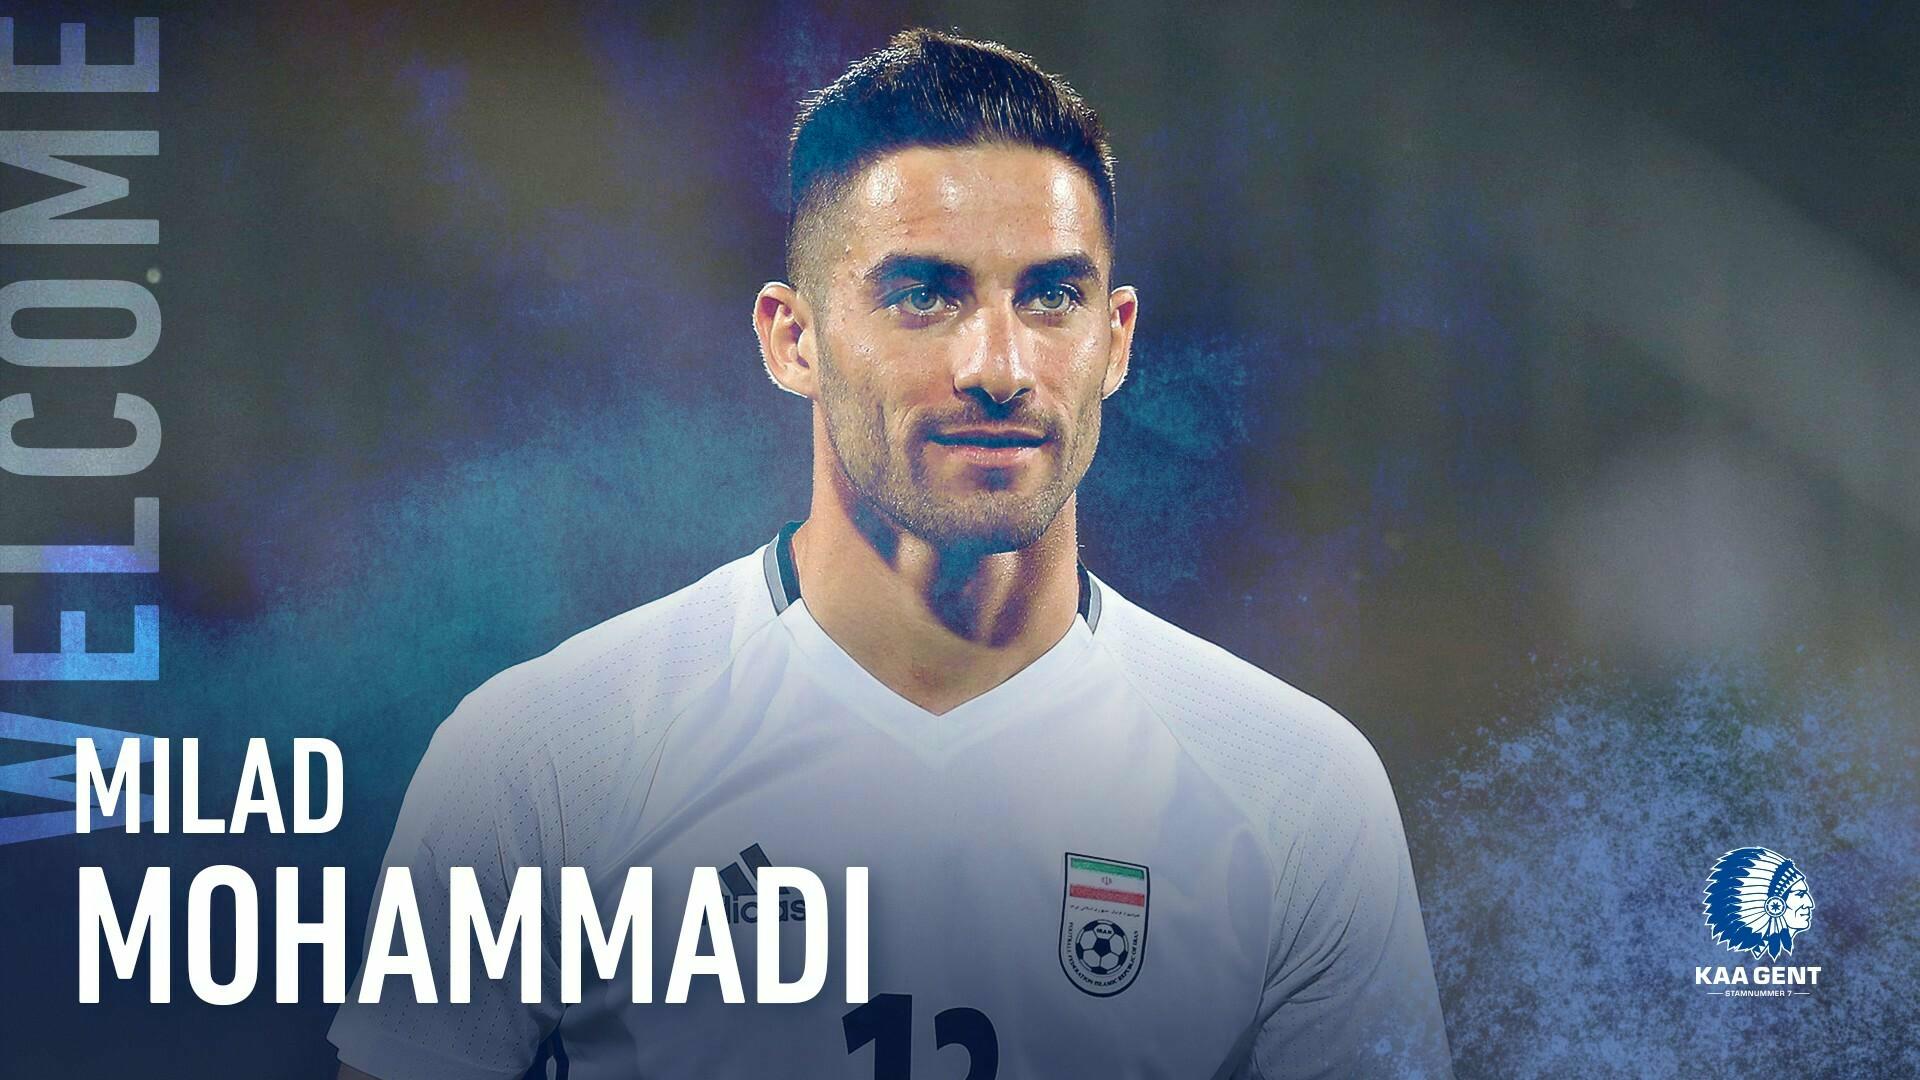 Welcome Milad Mohammadi!